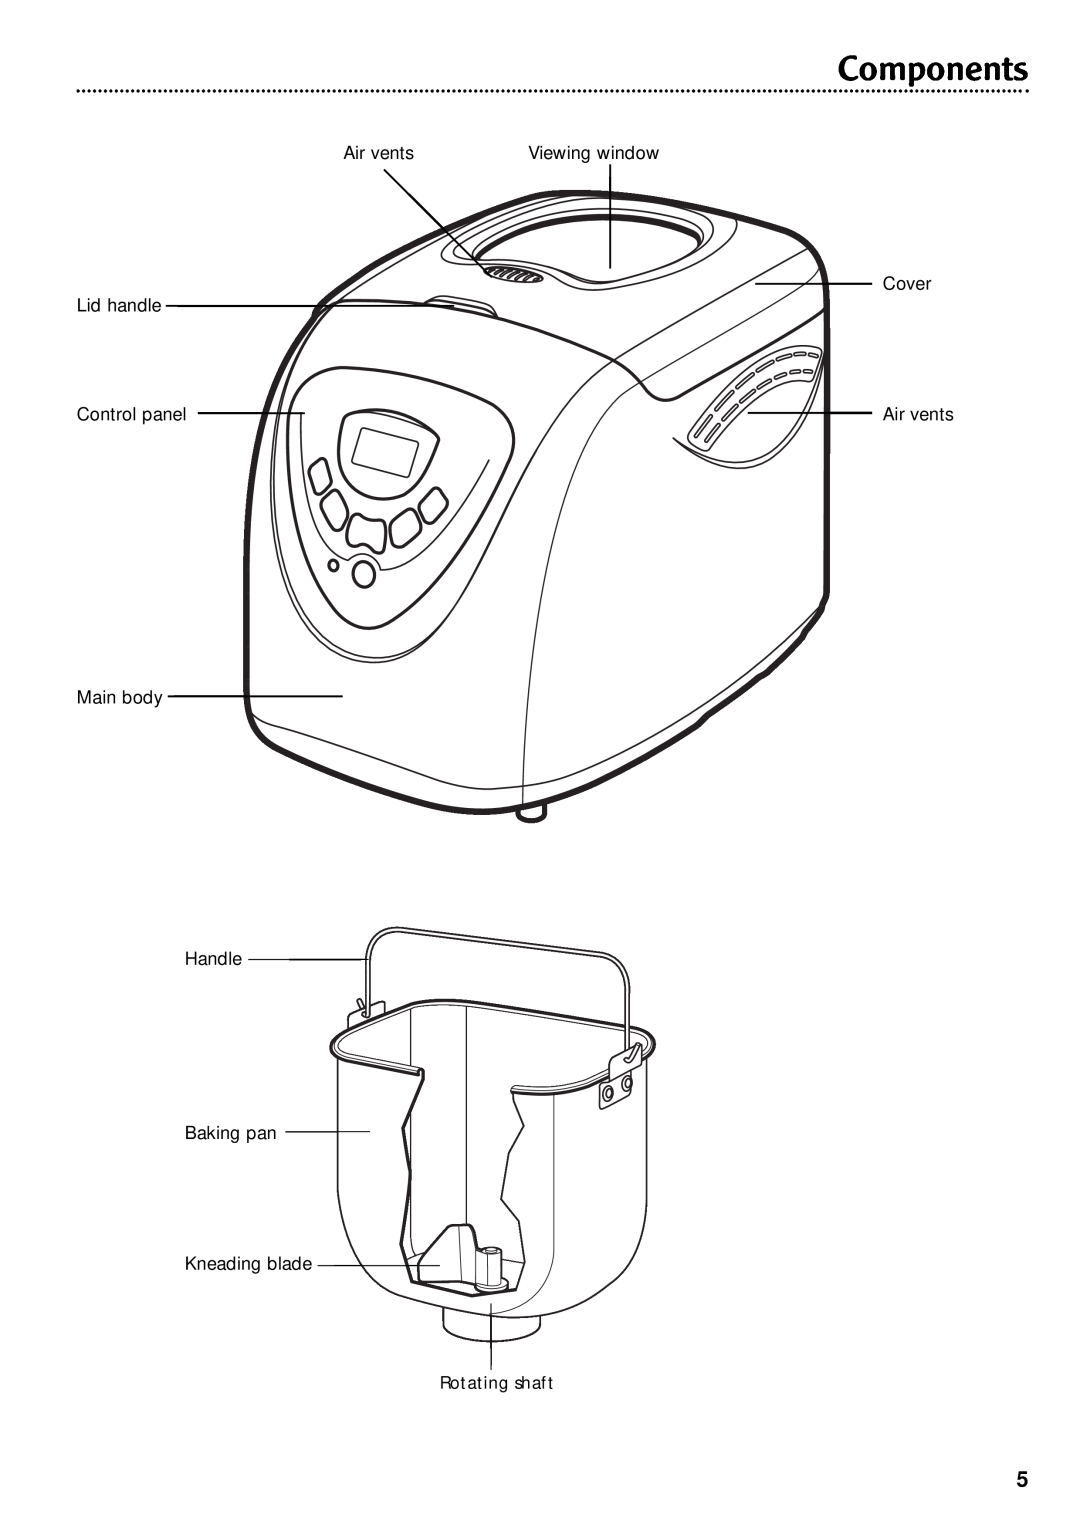 Morphy Richards Fastbake breadmaker manual Components, Air vents, Viewing window, Cover, Lid handle, Control panel 